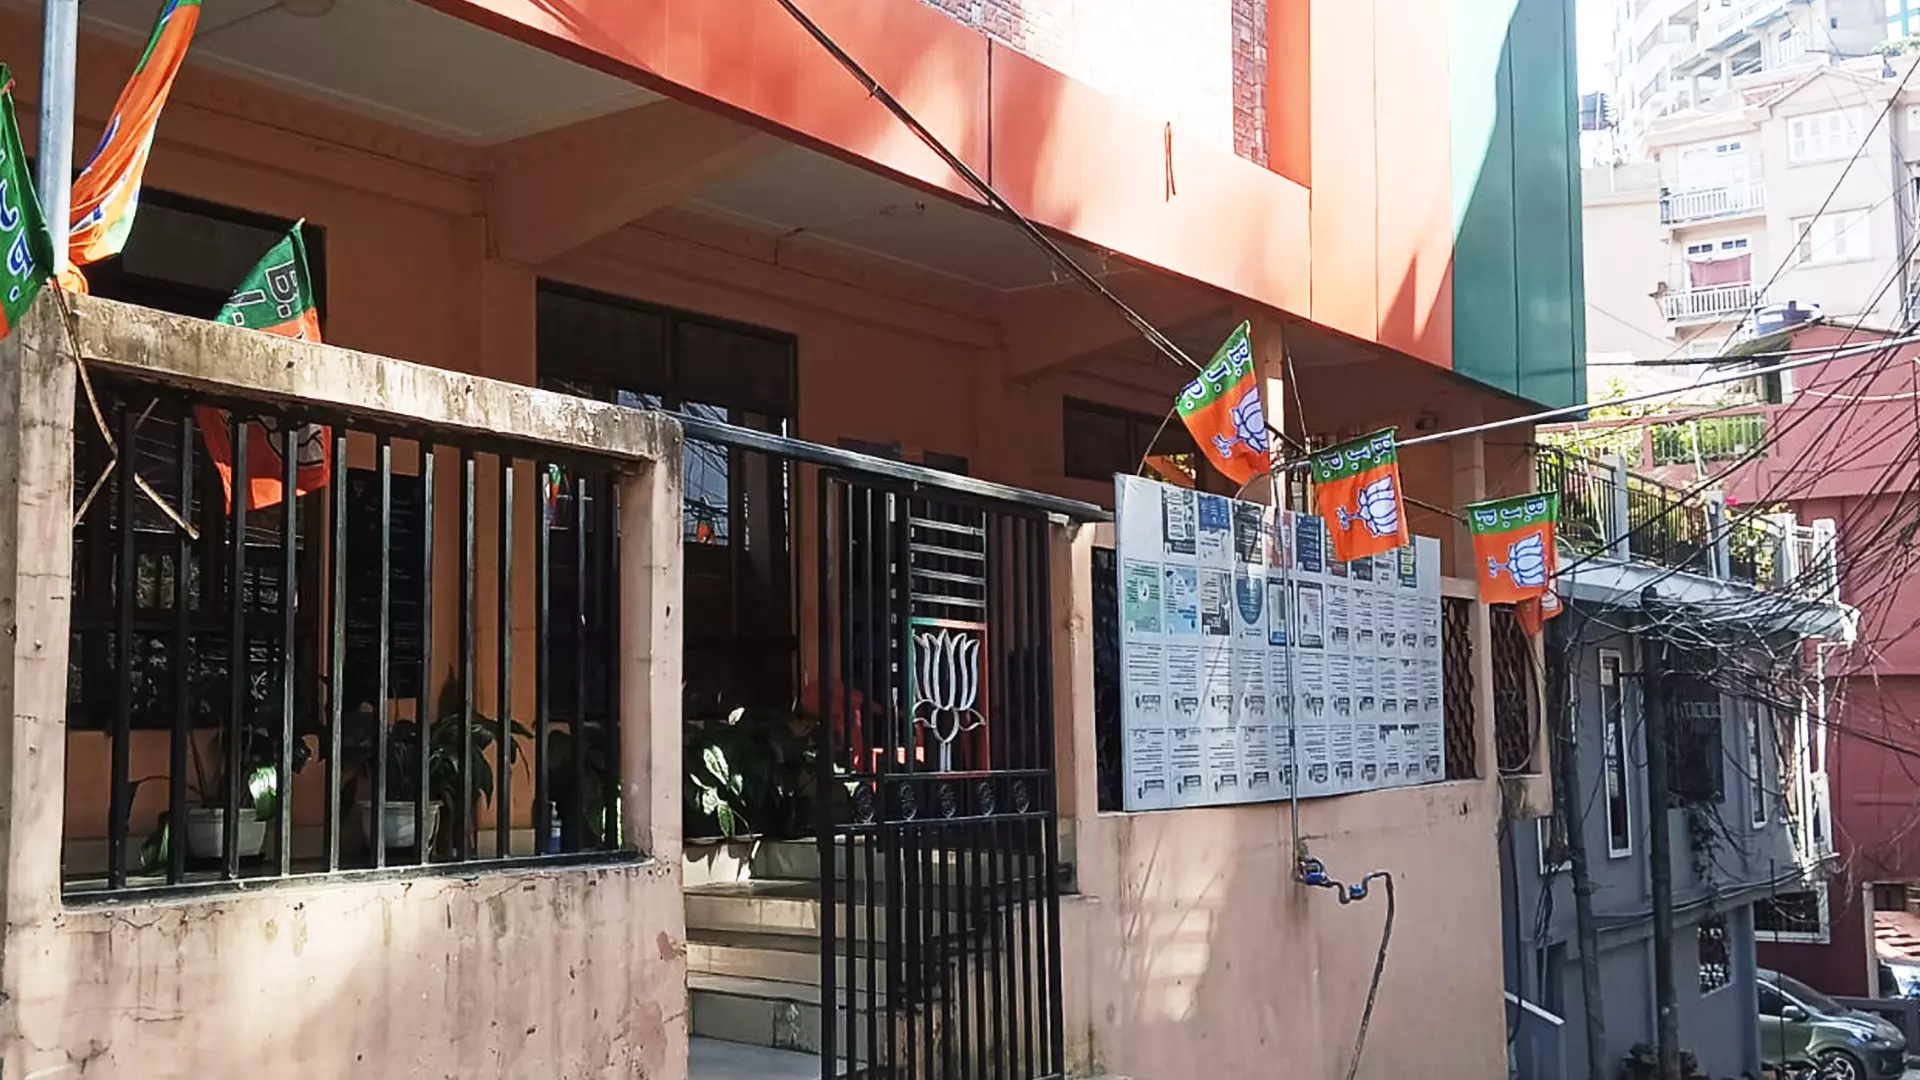 The scene at BJPs Mizoram headquarters. Only a few flags flutter on the premises but there are no posters or cut-outs. Photo: Zodin Sanga